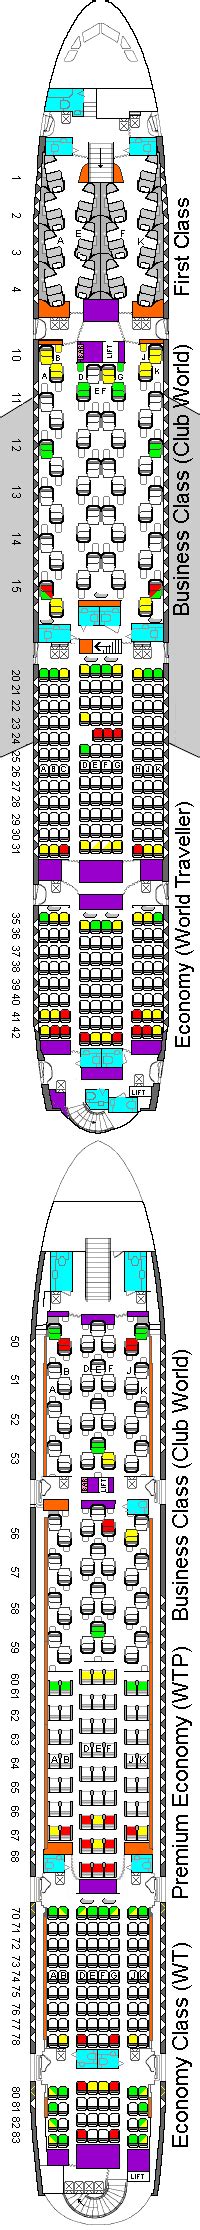 Delta Airbus A380 800 Seating Chart Elcho Table